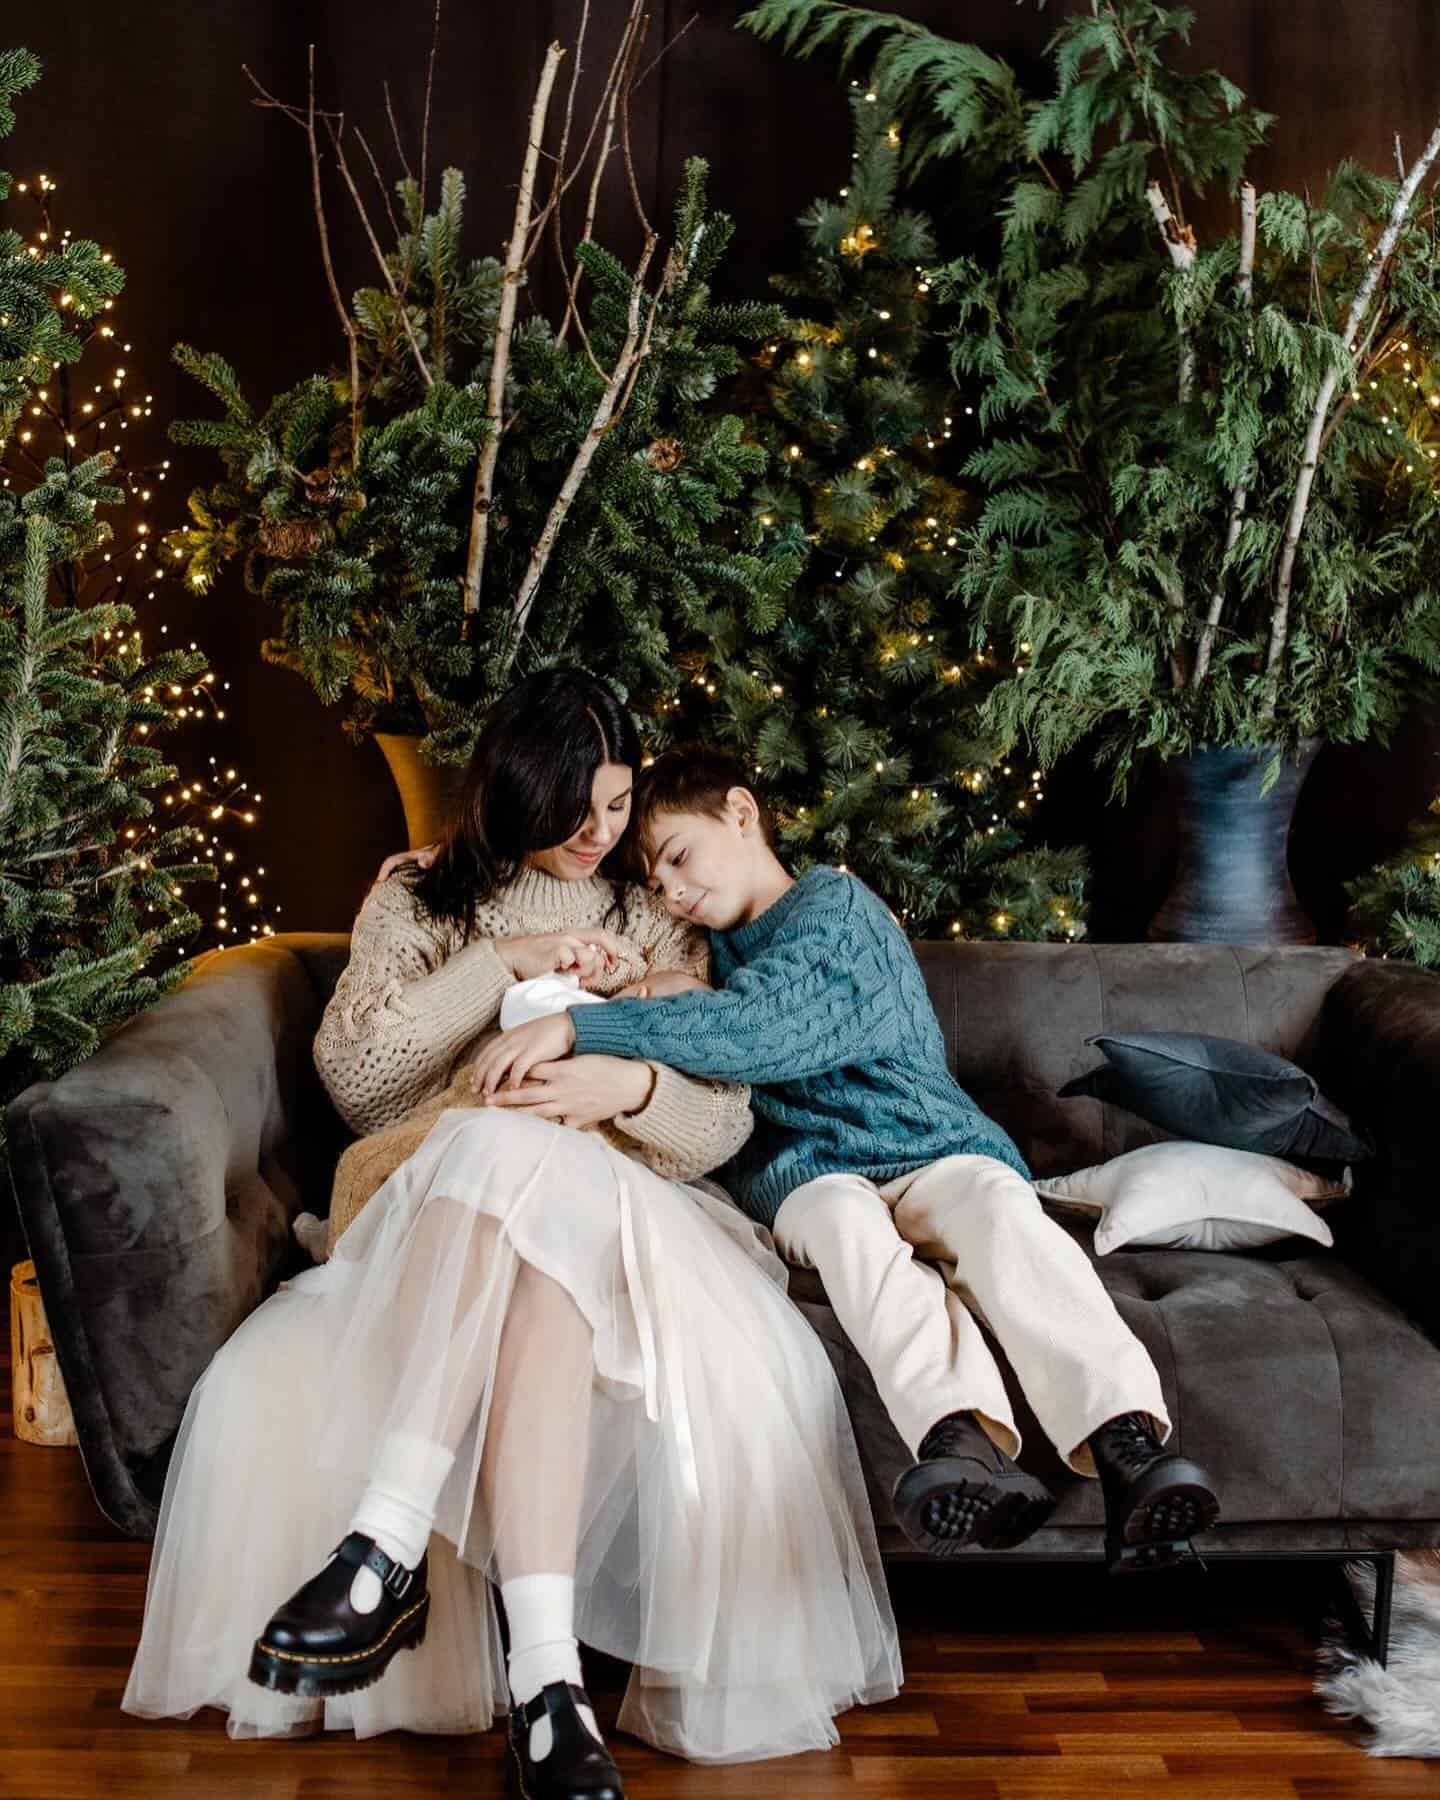 A Christmas family photoshoot with a mother and her children, wearing a white tulle skirt, white pants, and cable knit sweaters